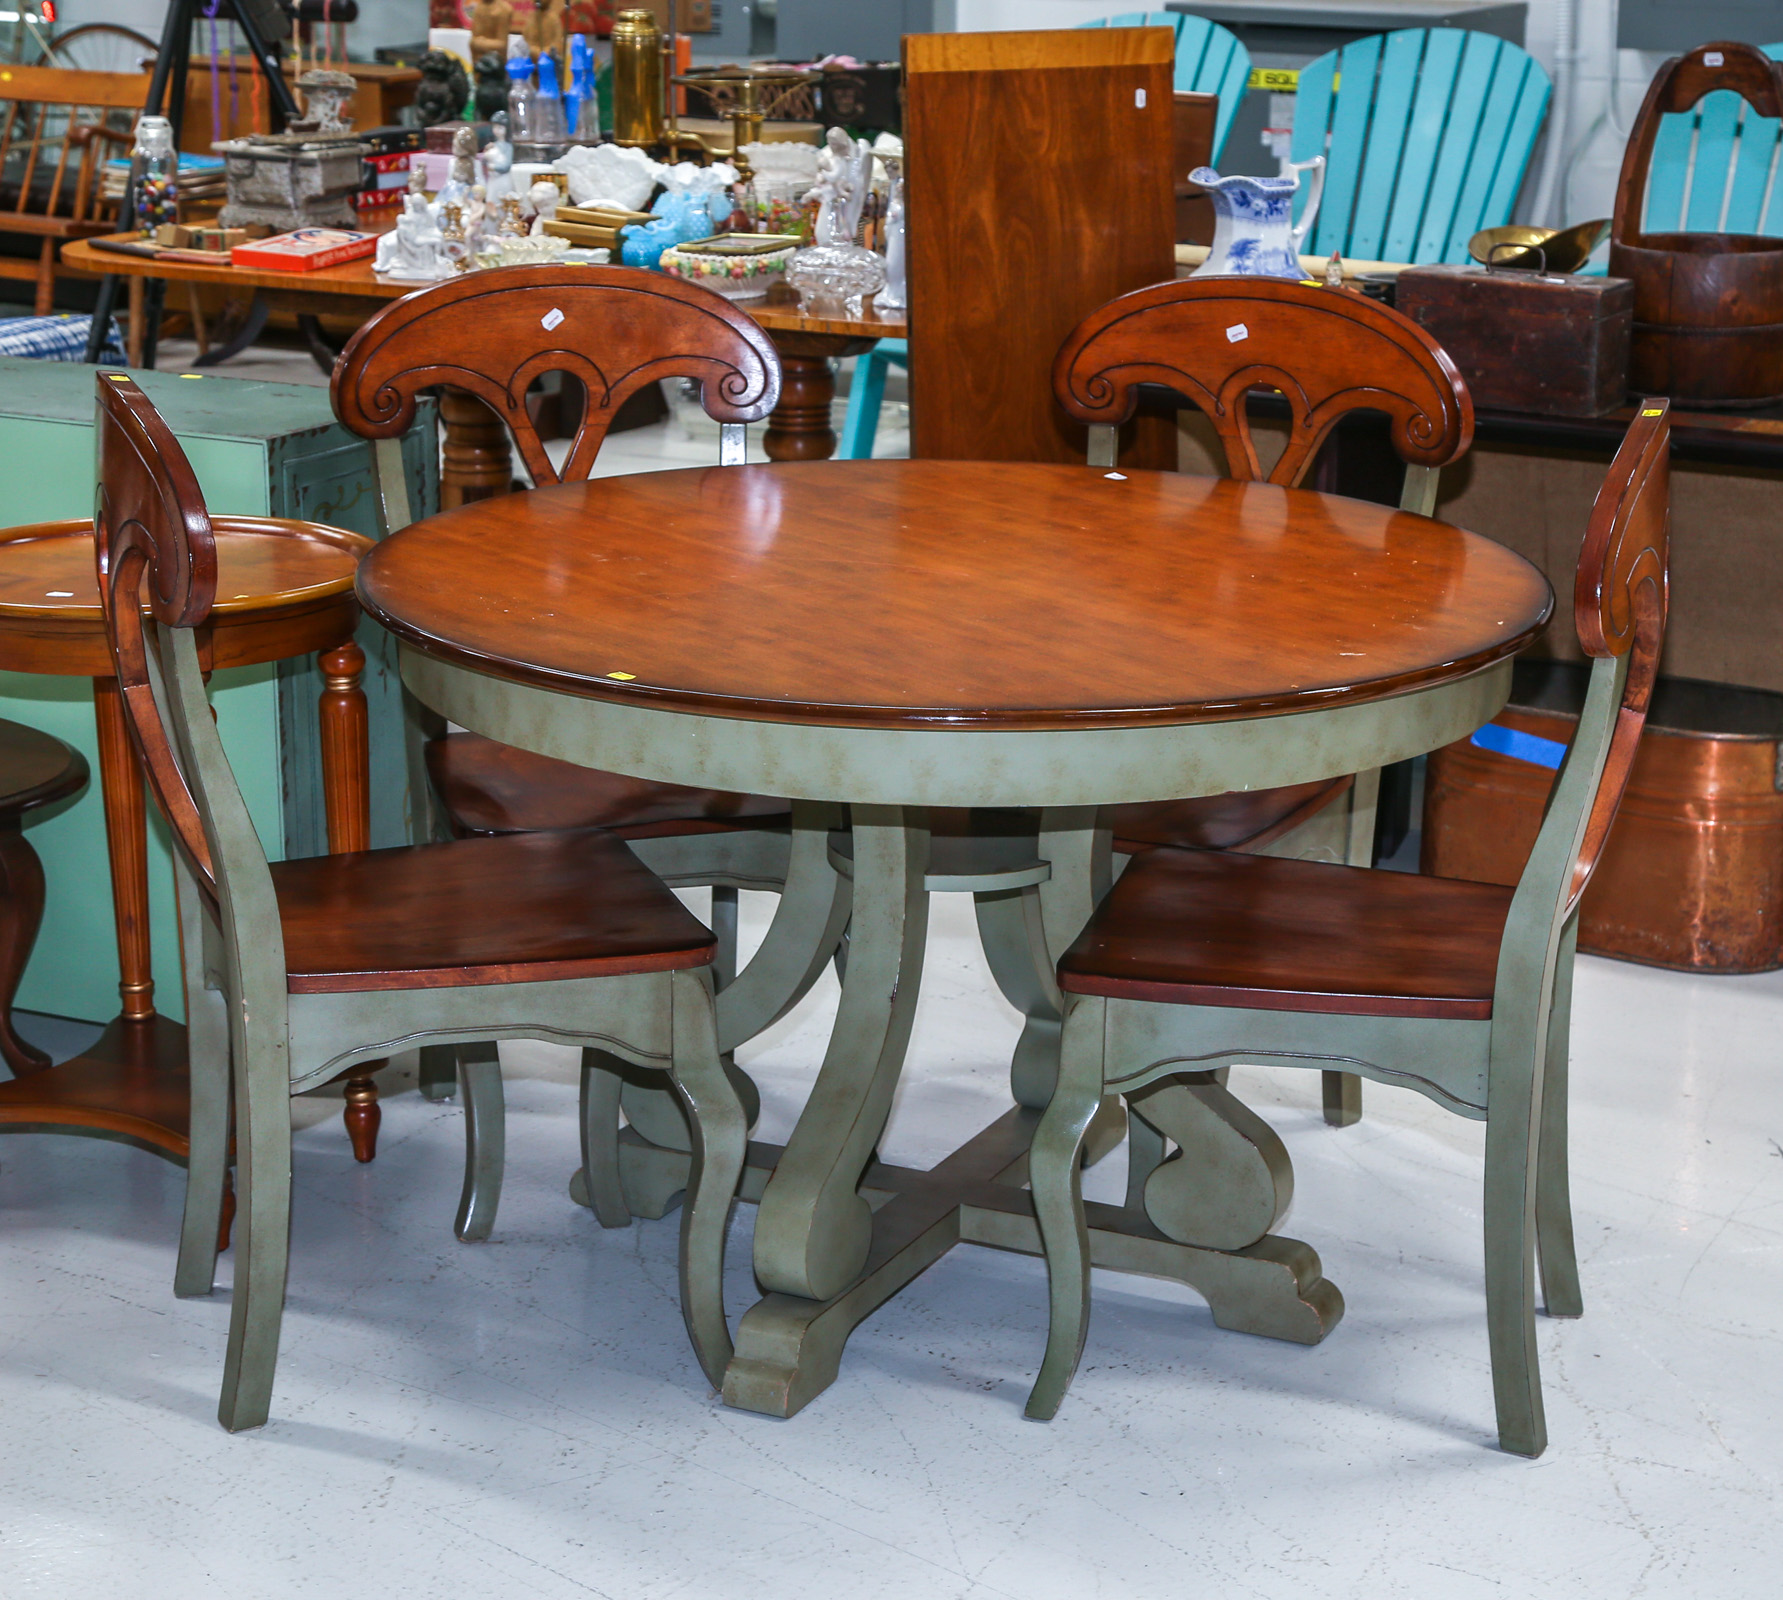 ROUND DINETTE TABLE WITH MATCHING